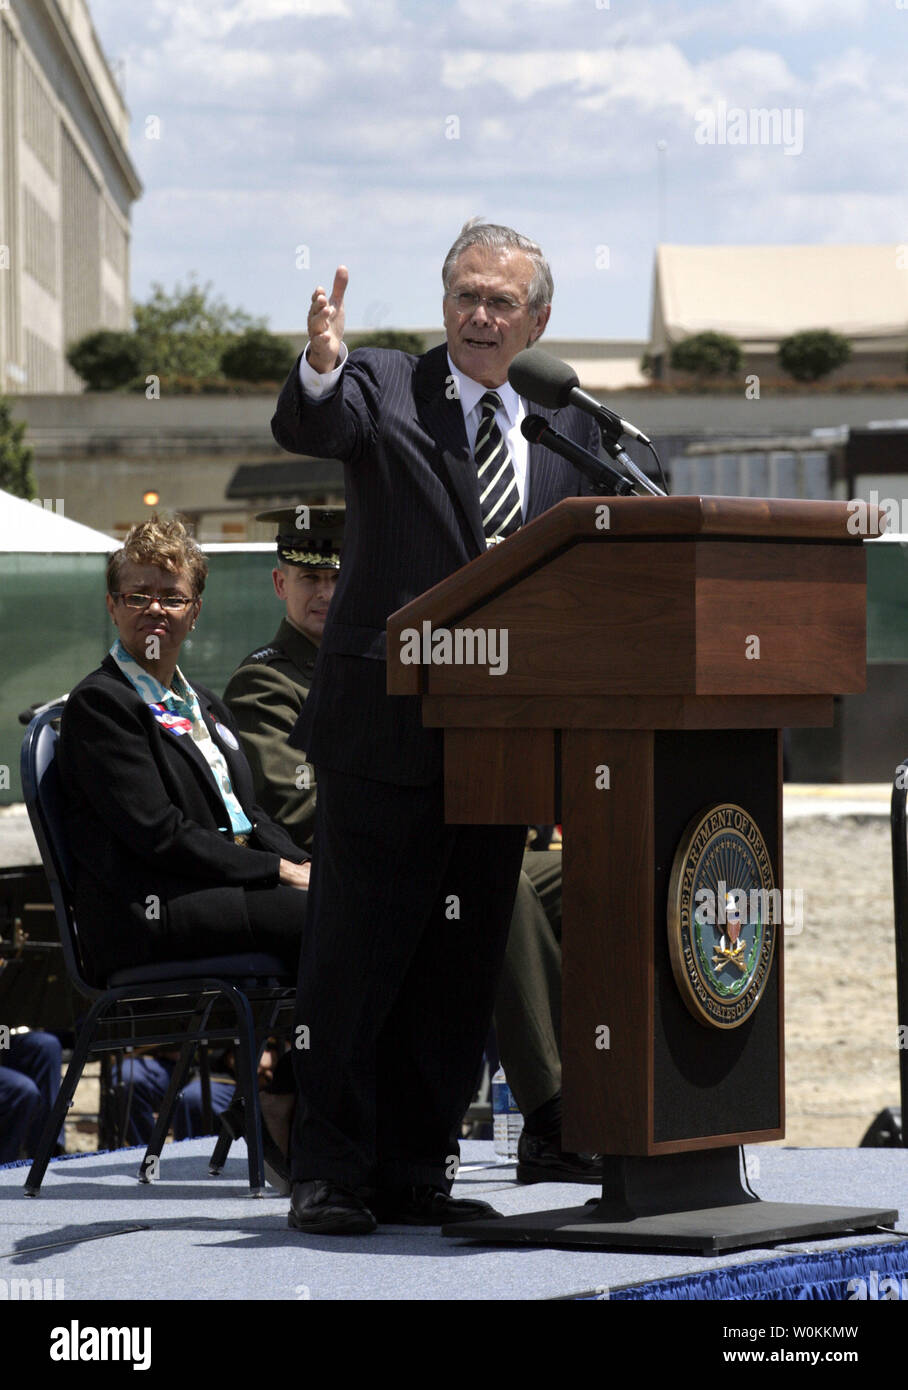 U.S. Defense Secretary Donald H. Rumsfeld gestures during remarks at the 9/11 Memorial ground-breaking ceremony outside of the Pentagon in Washington on June 15, 2006. The Pentagon Memorial will commemorate the 184 innocent lives lost in the Pentagon and on American Airlines Flight 77 on September 11, 2001. (UPI Photo/Yuri Gripas) Stock Photo